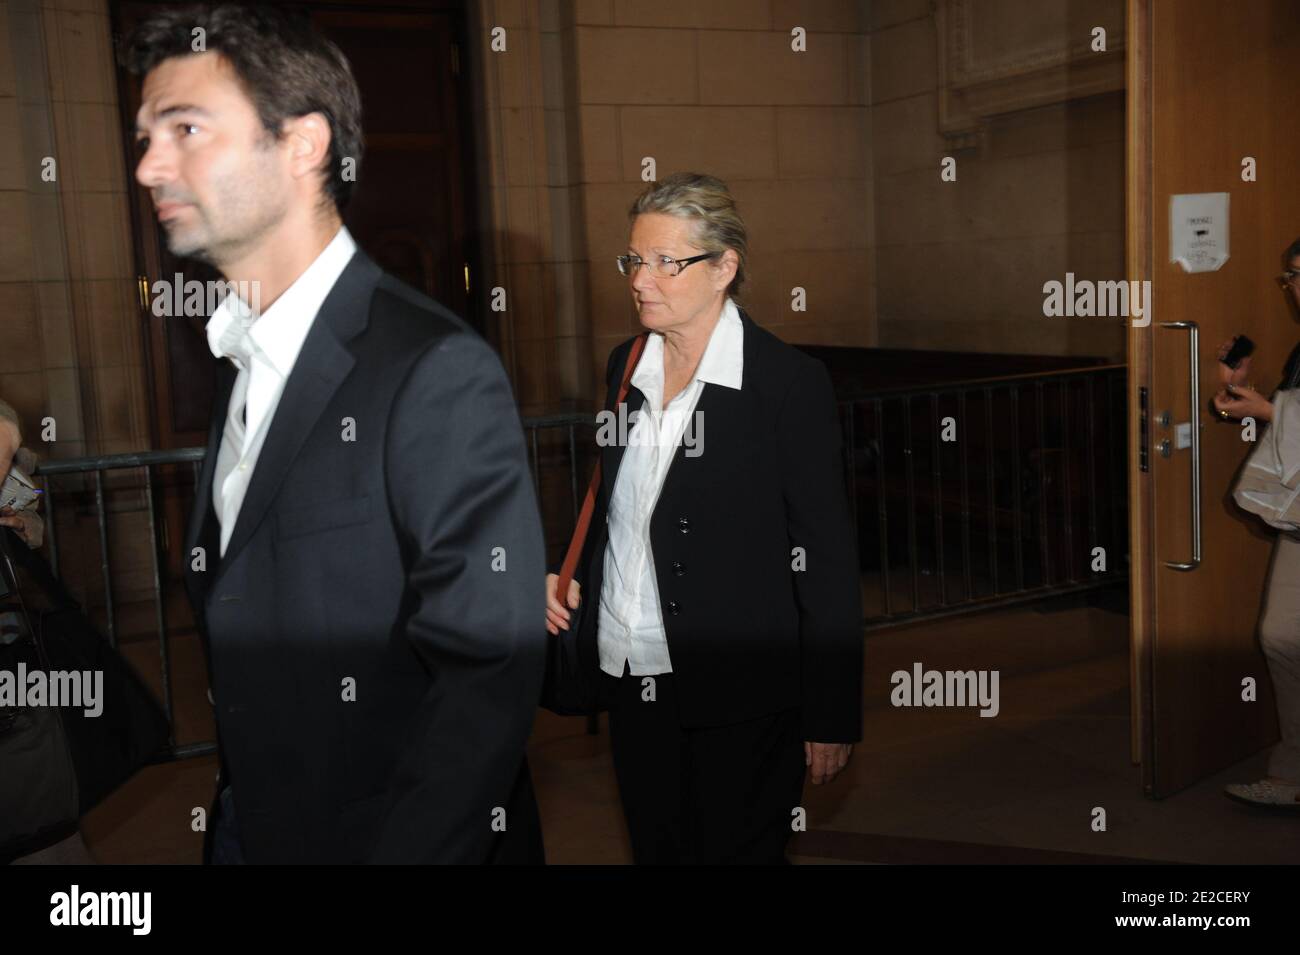 Danielle Gonnin, the mother of Kalinka Bamberski pictured at the Palais de Justice for German cardiologist Dieter Krombach's trial for the murder of Kalinka Bamberski, in Paris, France on October 4, 2011. The French court today decided to continue the trial of the German doctor, who is accused of having raped and killed his then 14-year-old stepdaughter, Kalinka Bamberski, in the summer of 1982 while she was holidaying with her mother at Krombach's home at Lake Constance, southern Germany. A court in Germany ruled that Krombach could not be held responsible for the death, but in 1995 a court i Stock Photo